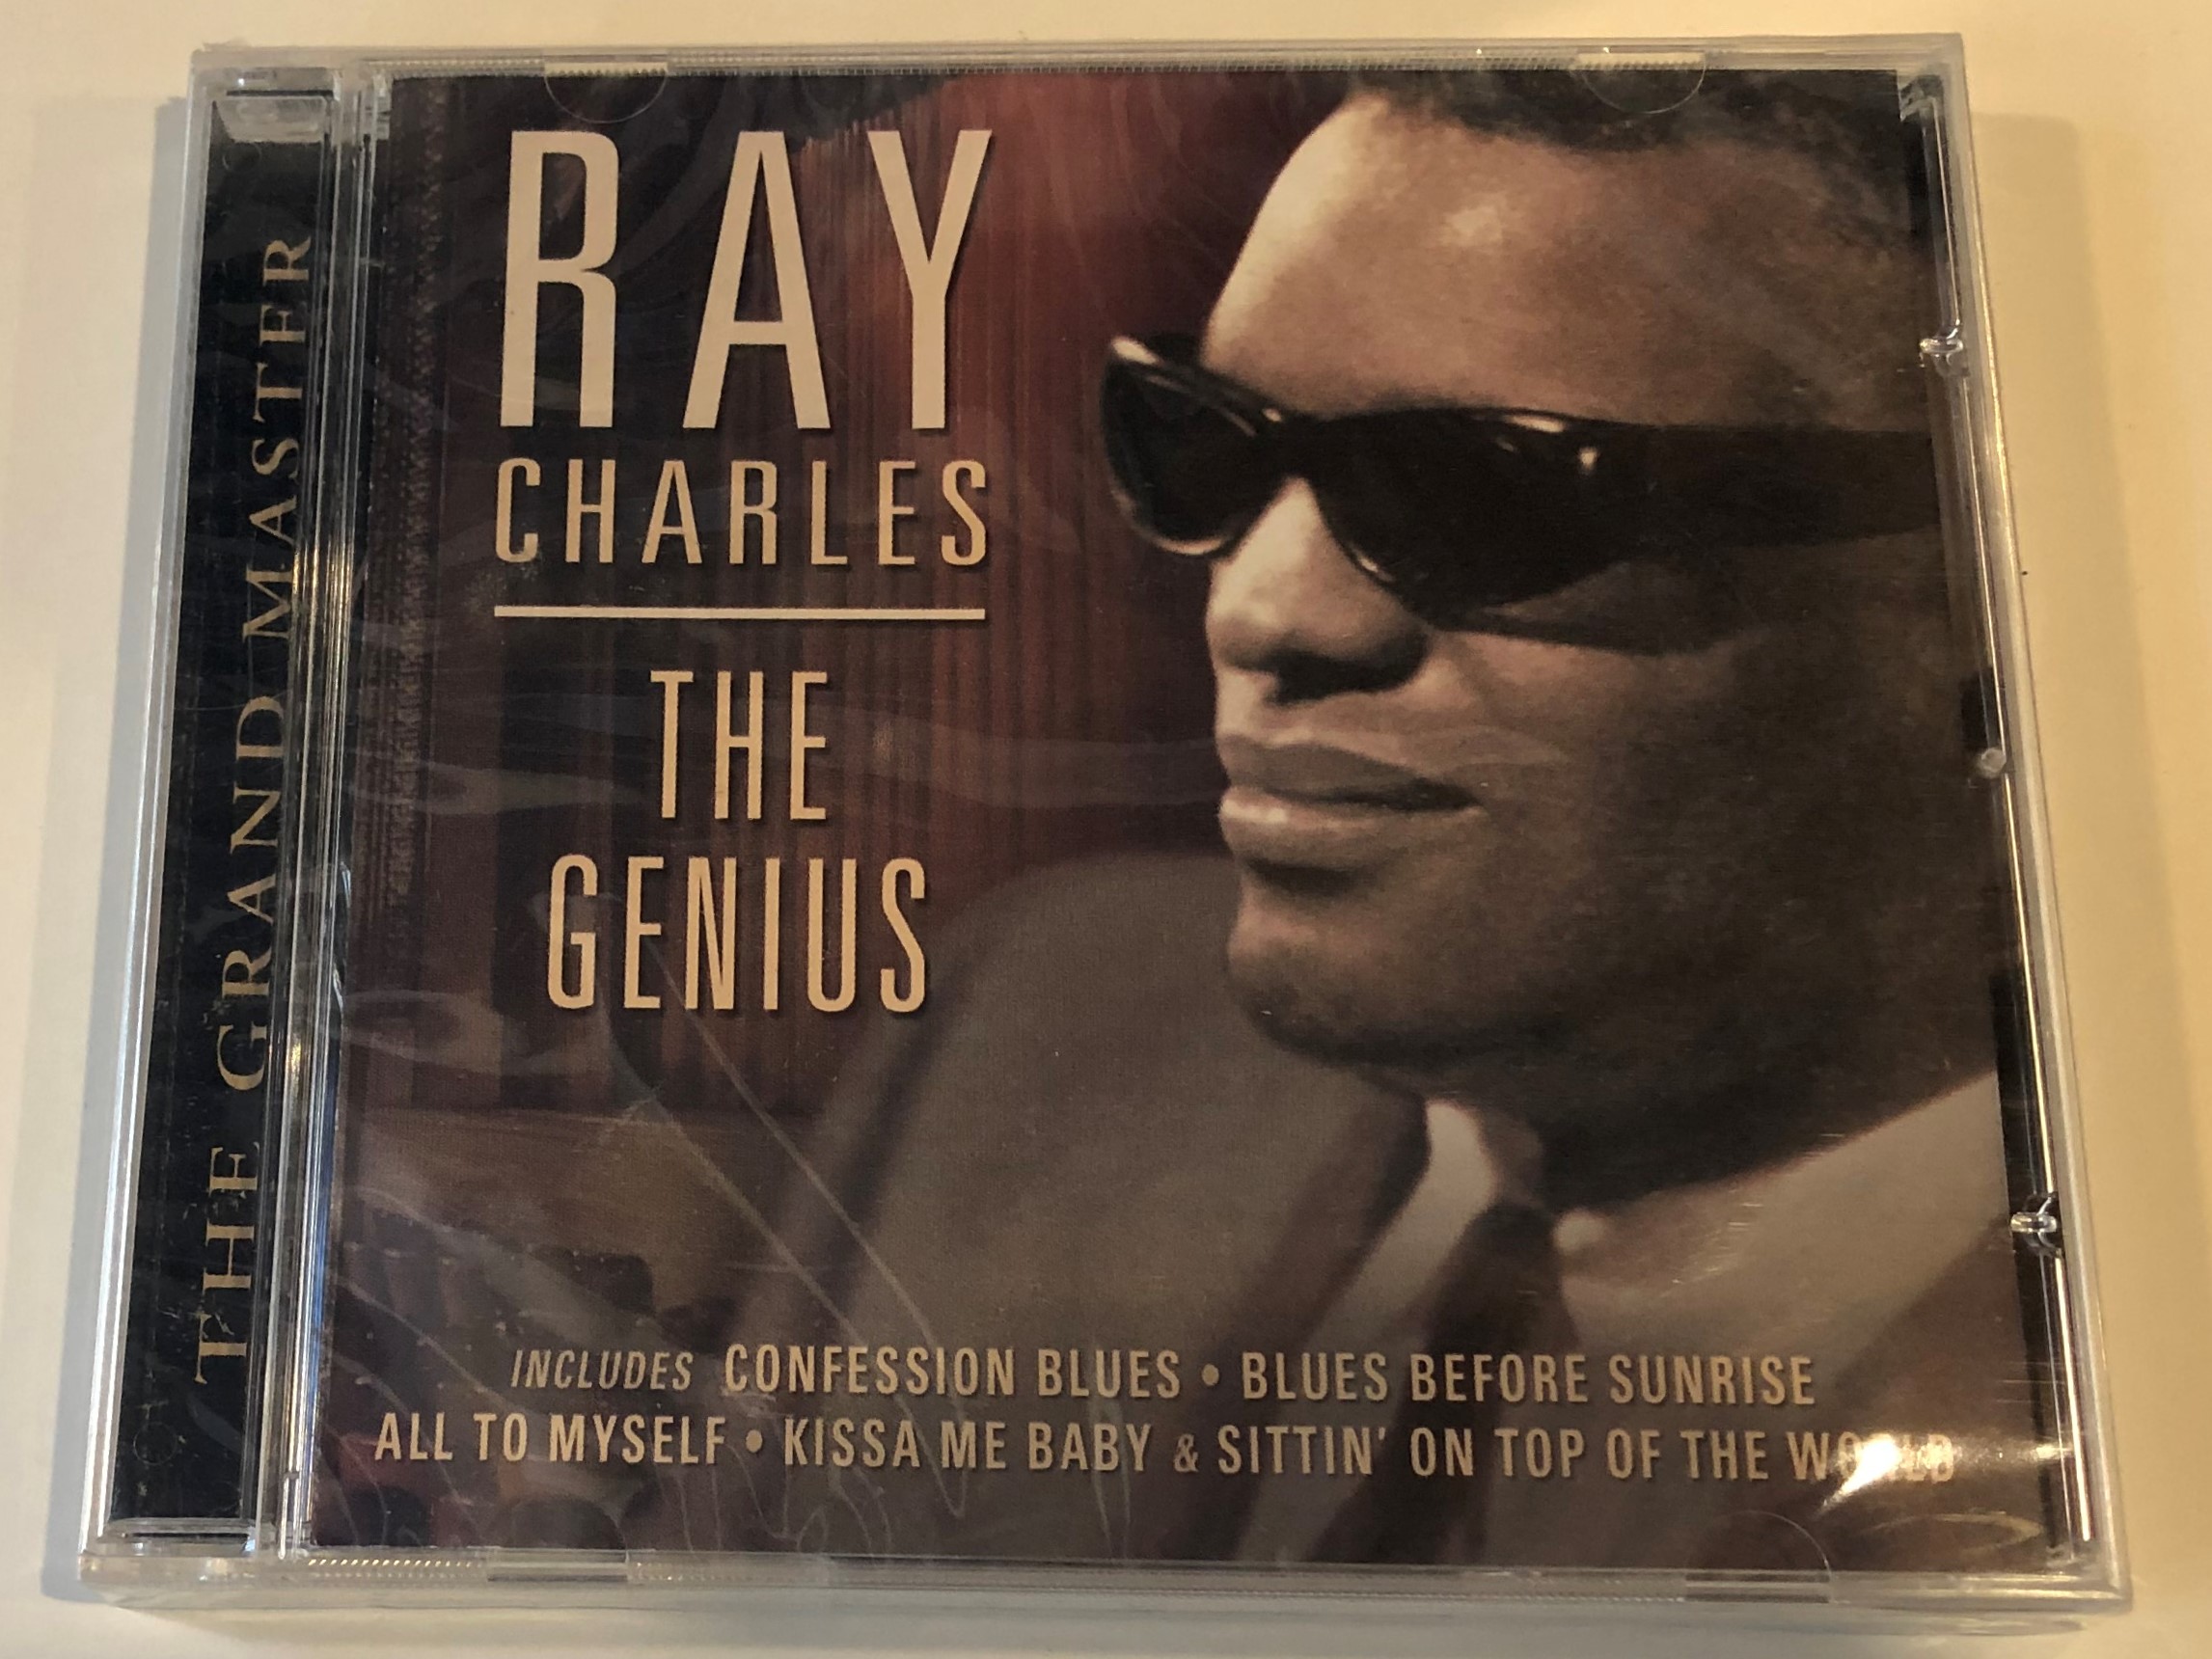 ray-charles-the-genius-the-grand-master-includes-confession-blues-blues-before-sunrise-all-to-myself-kissa-me-baby-sittin-on-top-of-the-world-prism-leisure-audio-cd-2003-platcd-927-1-.jpg